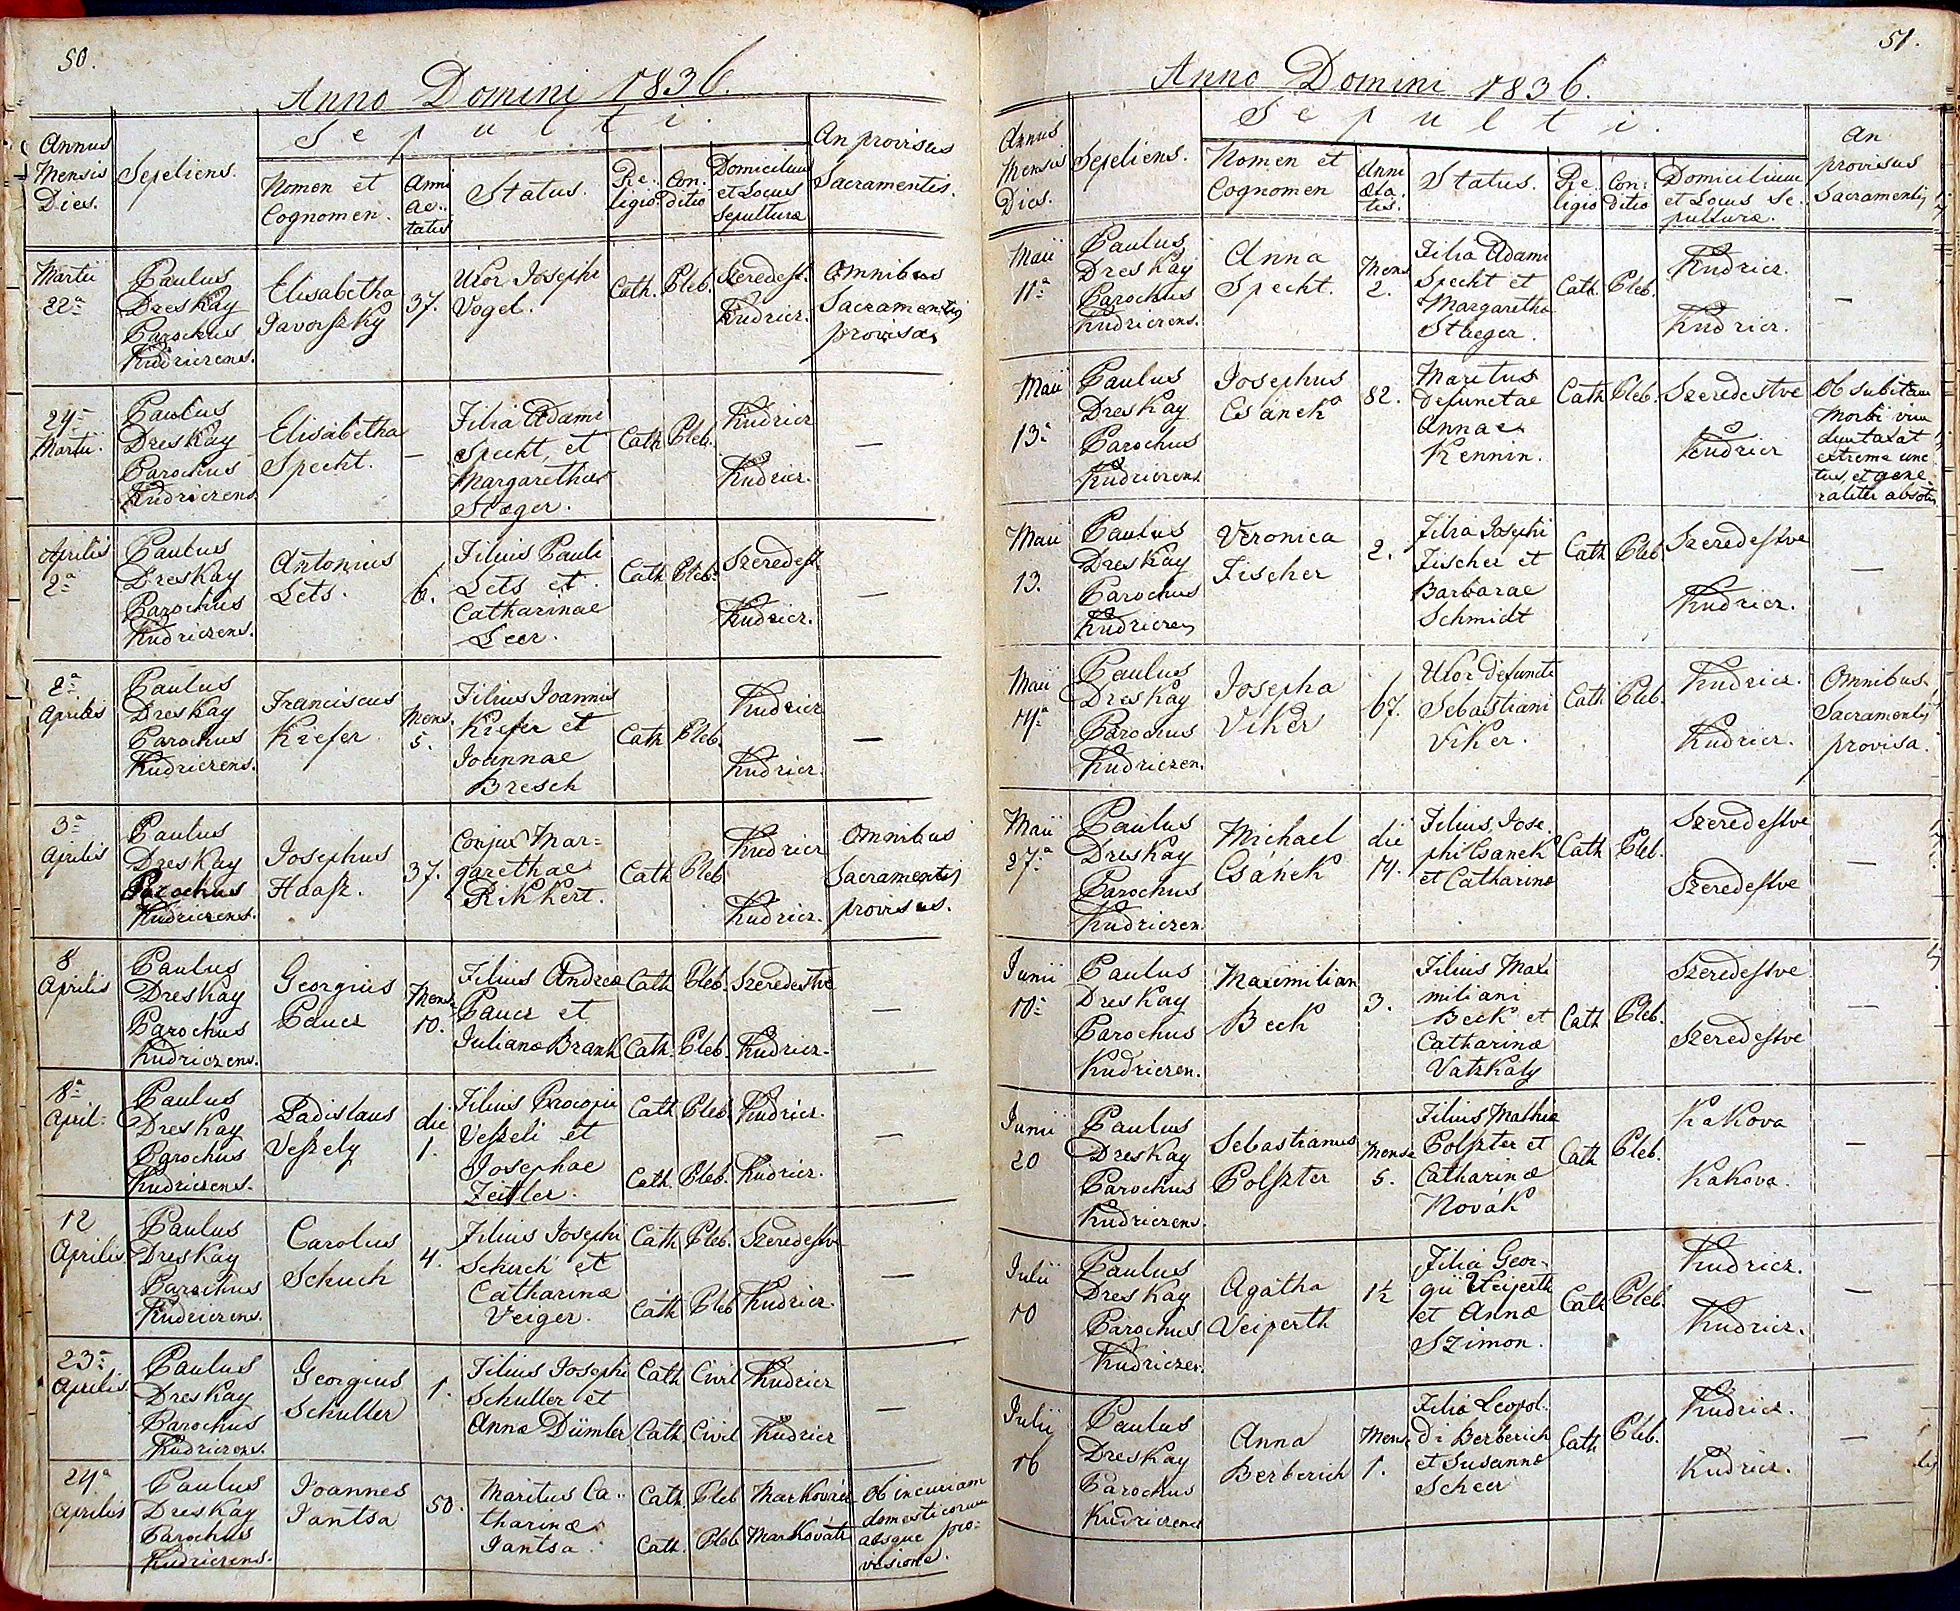 images/church_records/DEATHS/1742-1775D/050 i 051